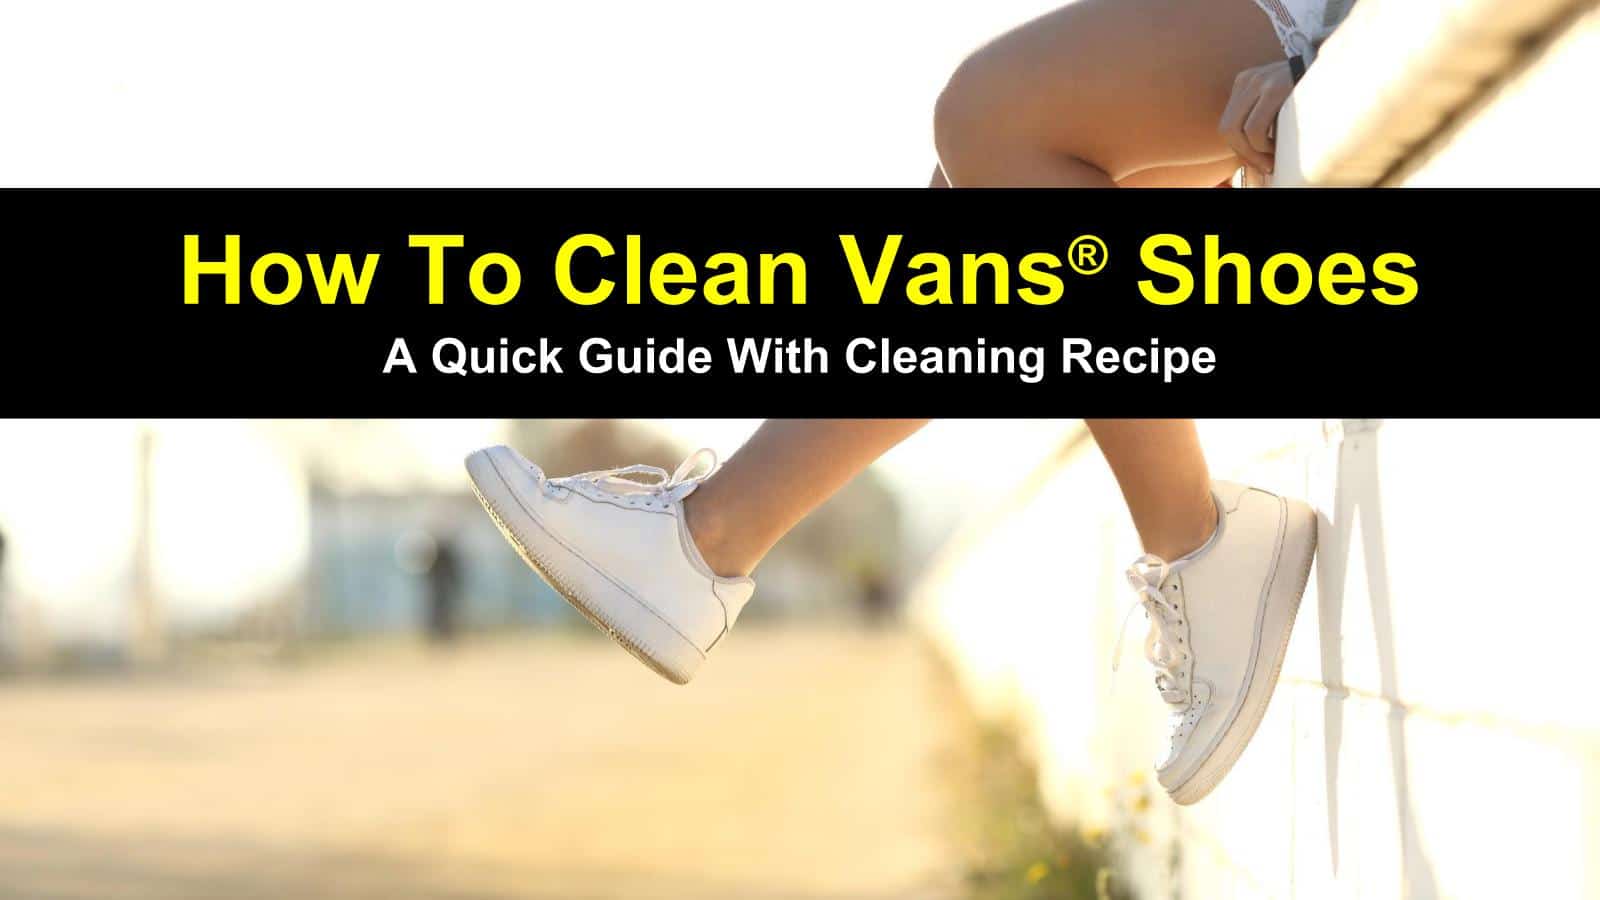 How To Wash Vans Shoes Titleimg - Couch - HD Wallpaper 